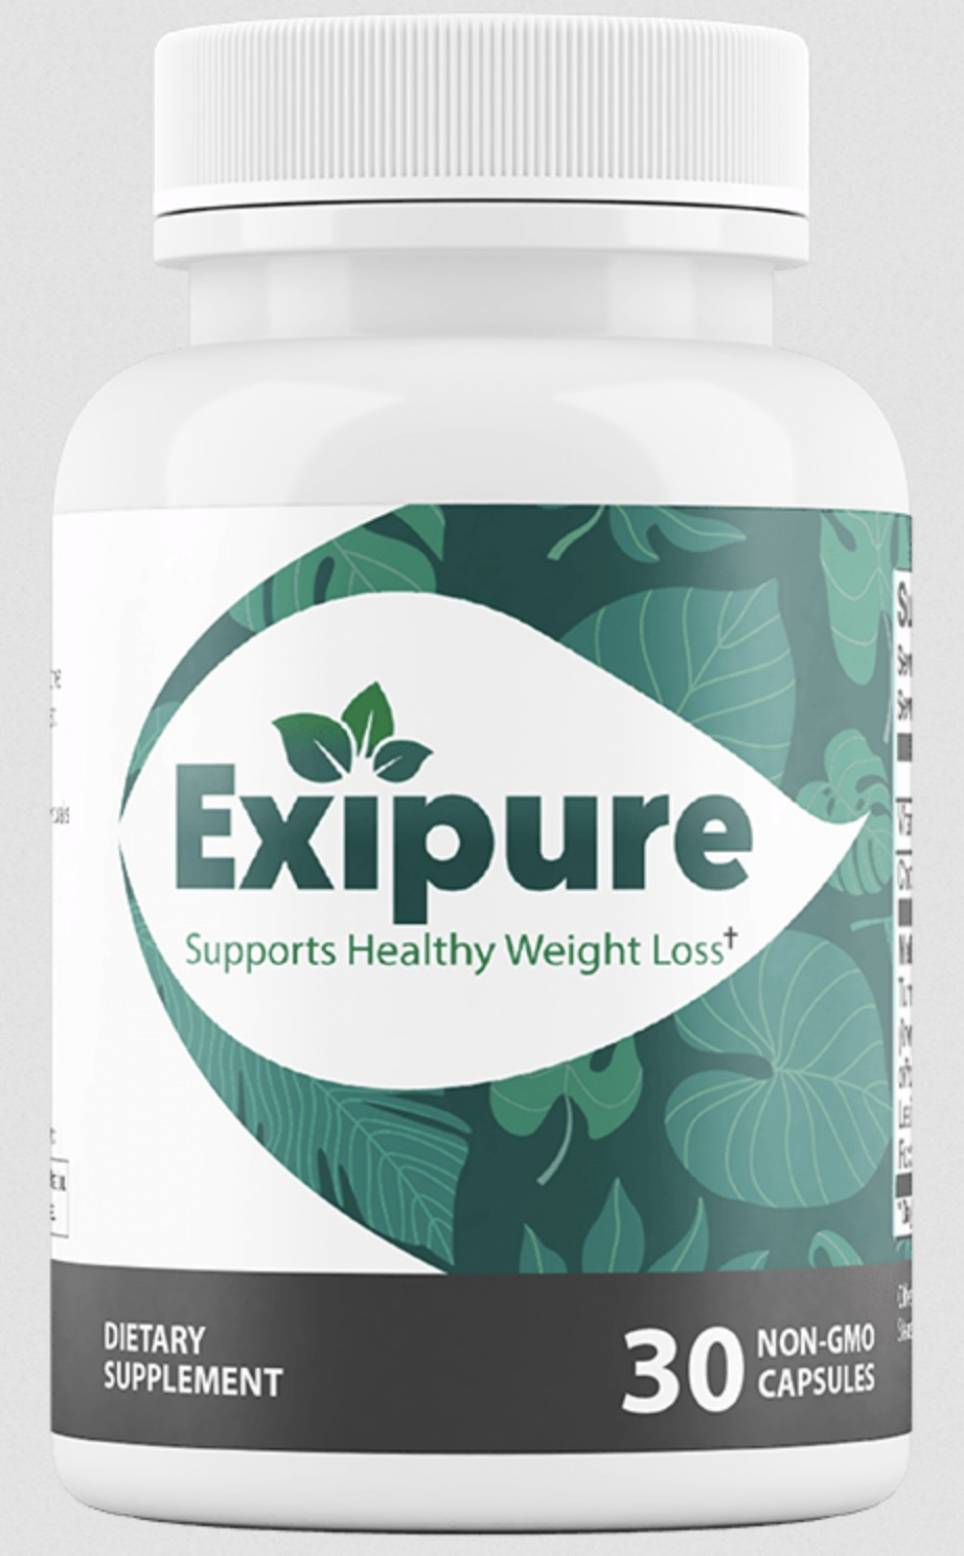 what are the reviews on Exipure